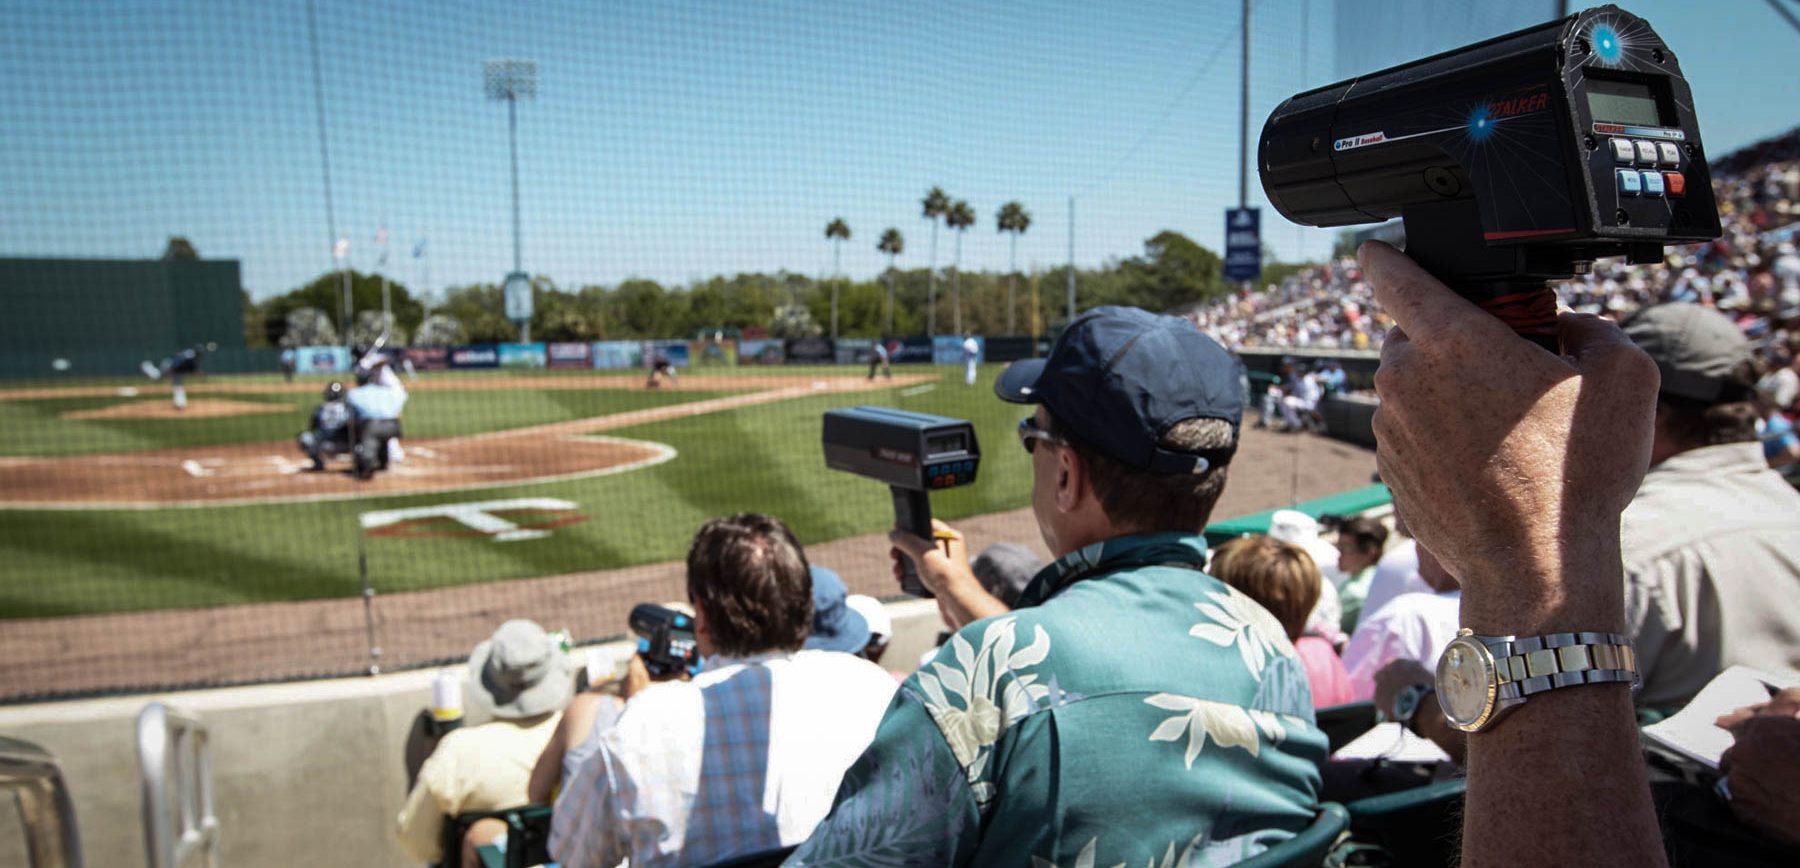 Baseball Scouting Jobs: What It Takes To Become A Baseball Scout